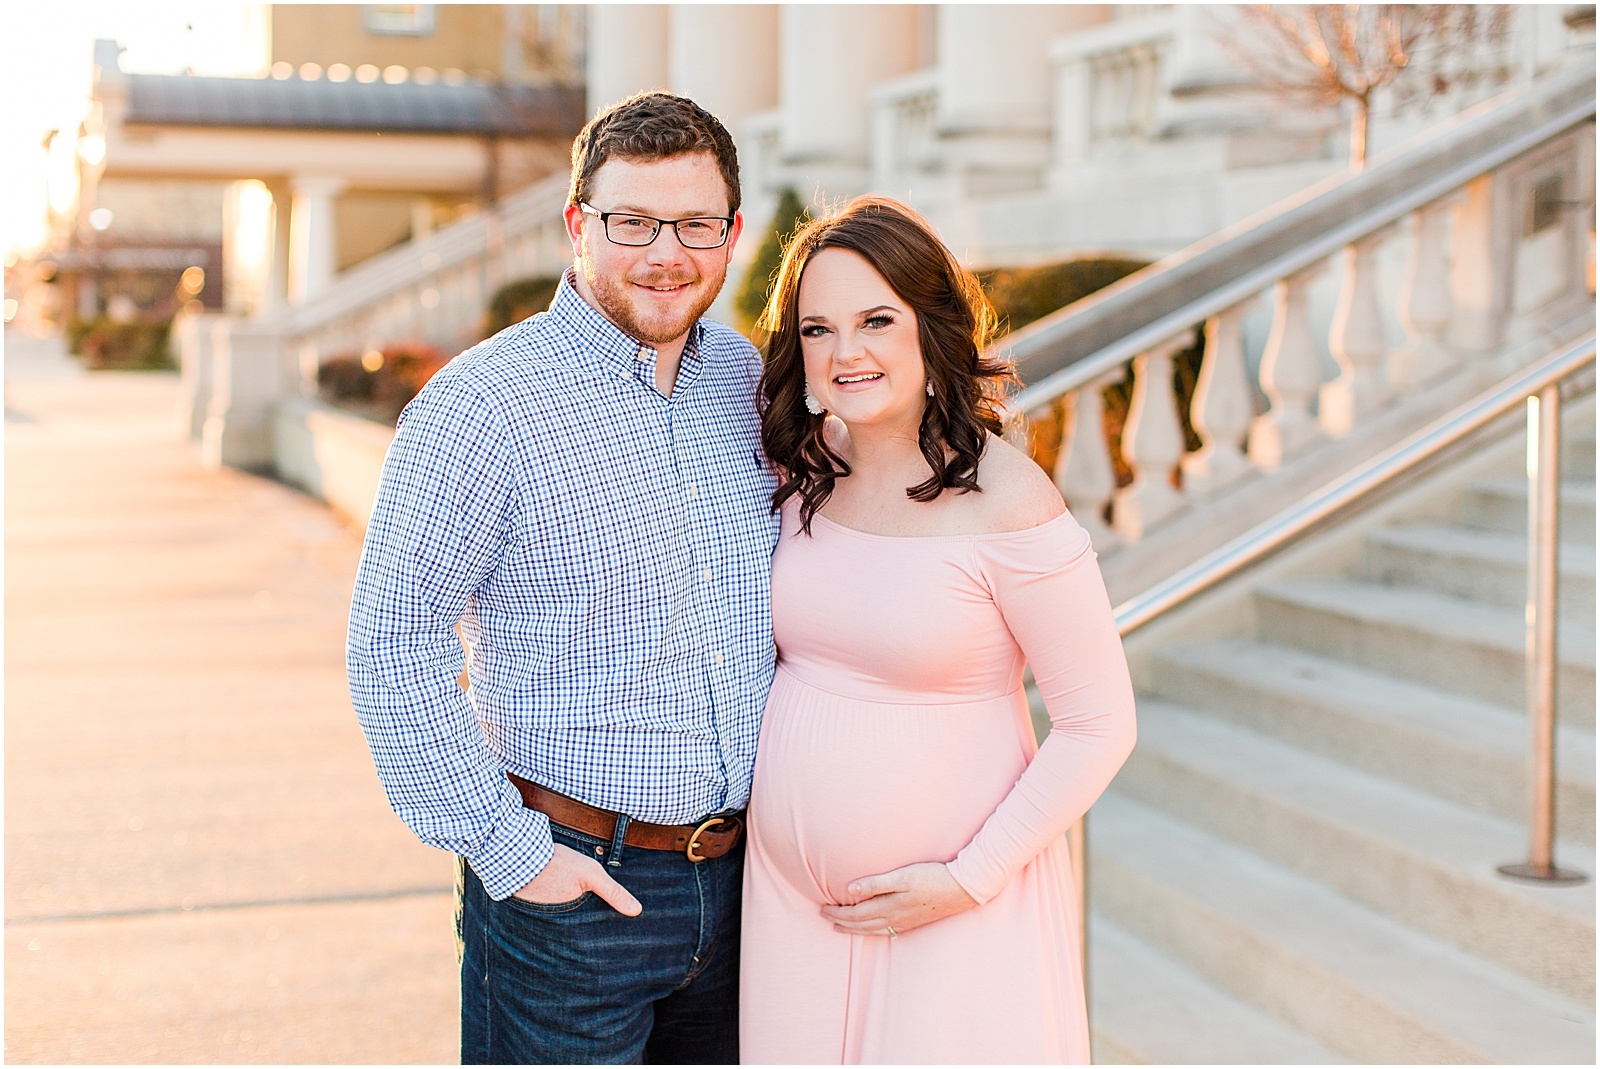 A Downtown Owensboro Maternity Session | Kayla and Grant Evansville Indiana Wedding Photographers-0006.jpg